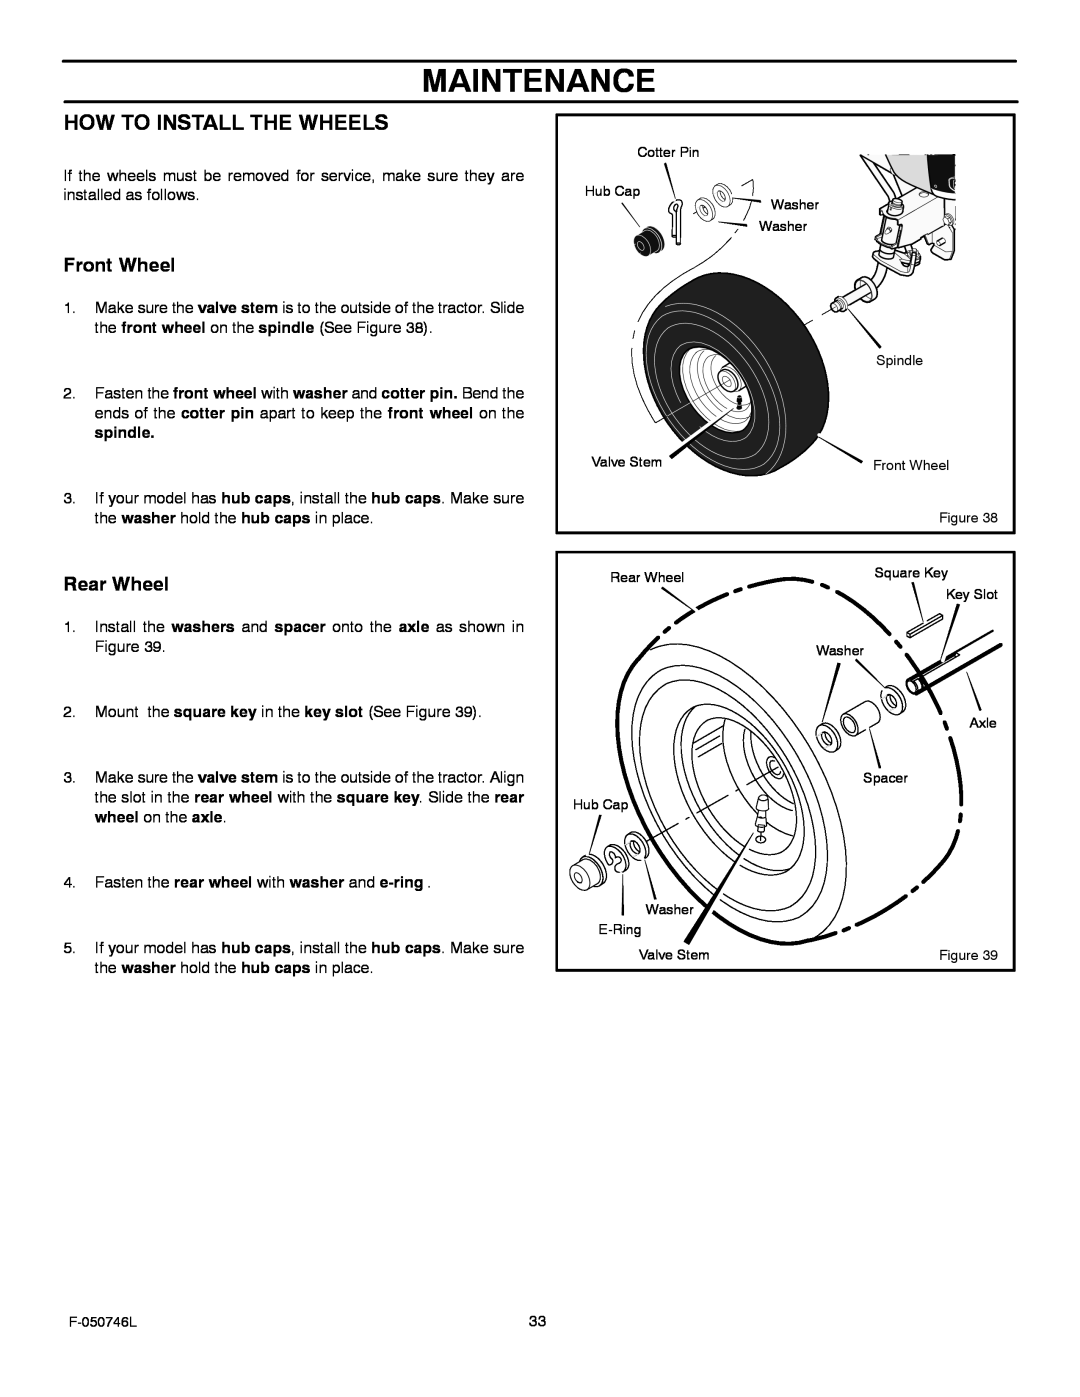 Murray 425016x48A manual Maintenance, How To Install The Wheels, Front Wheel, Rear Wheel 